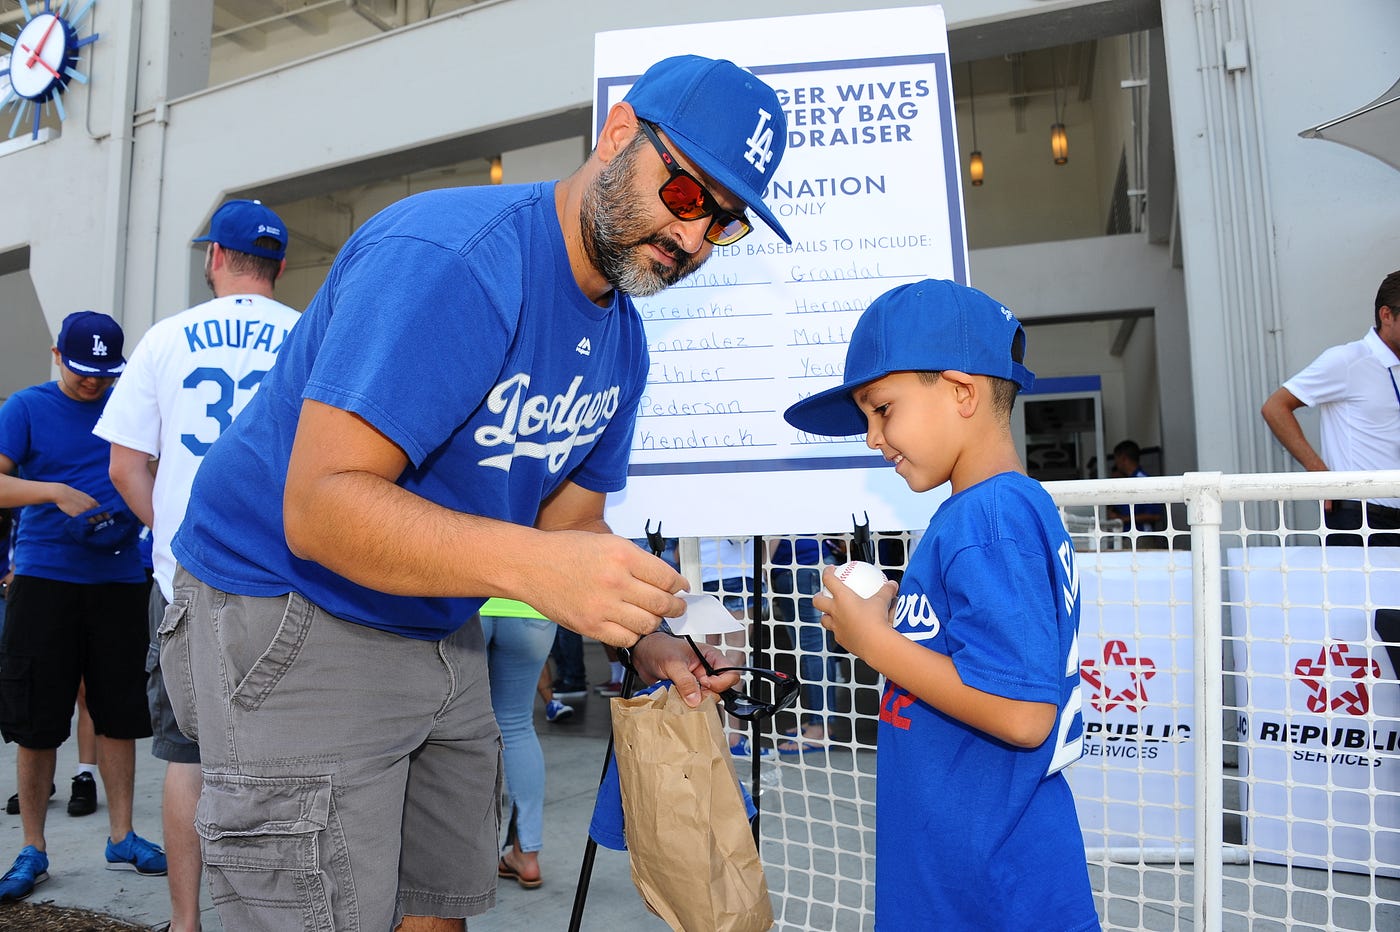 Dodgers Foundation on X: Help us and @Dodgers Spouses support